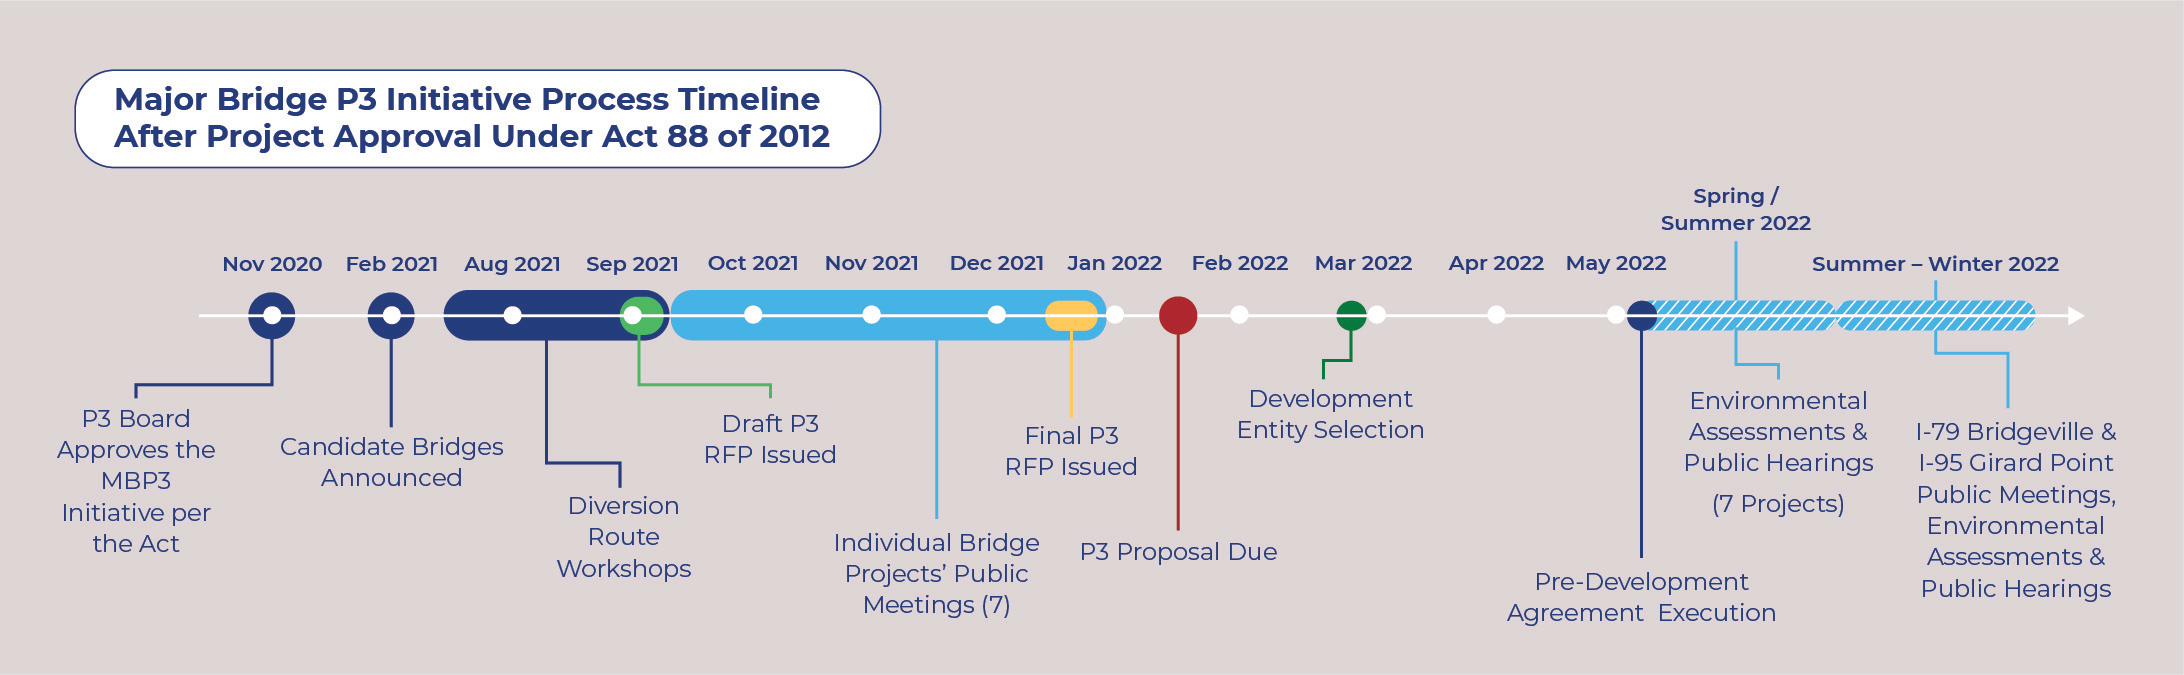 Timeline of Major Bridge P3 process. The P3 request for qualifications was issued in July 2021. Diversion route workshops are being held August-September 2021. The draft P3 request for proposals will be issued in September 2021. Individual bridge projects' public meetings will be held October 2021-January 2022. A final P3 RFP will be issued in mid-December 2021.